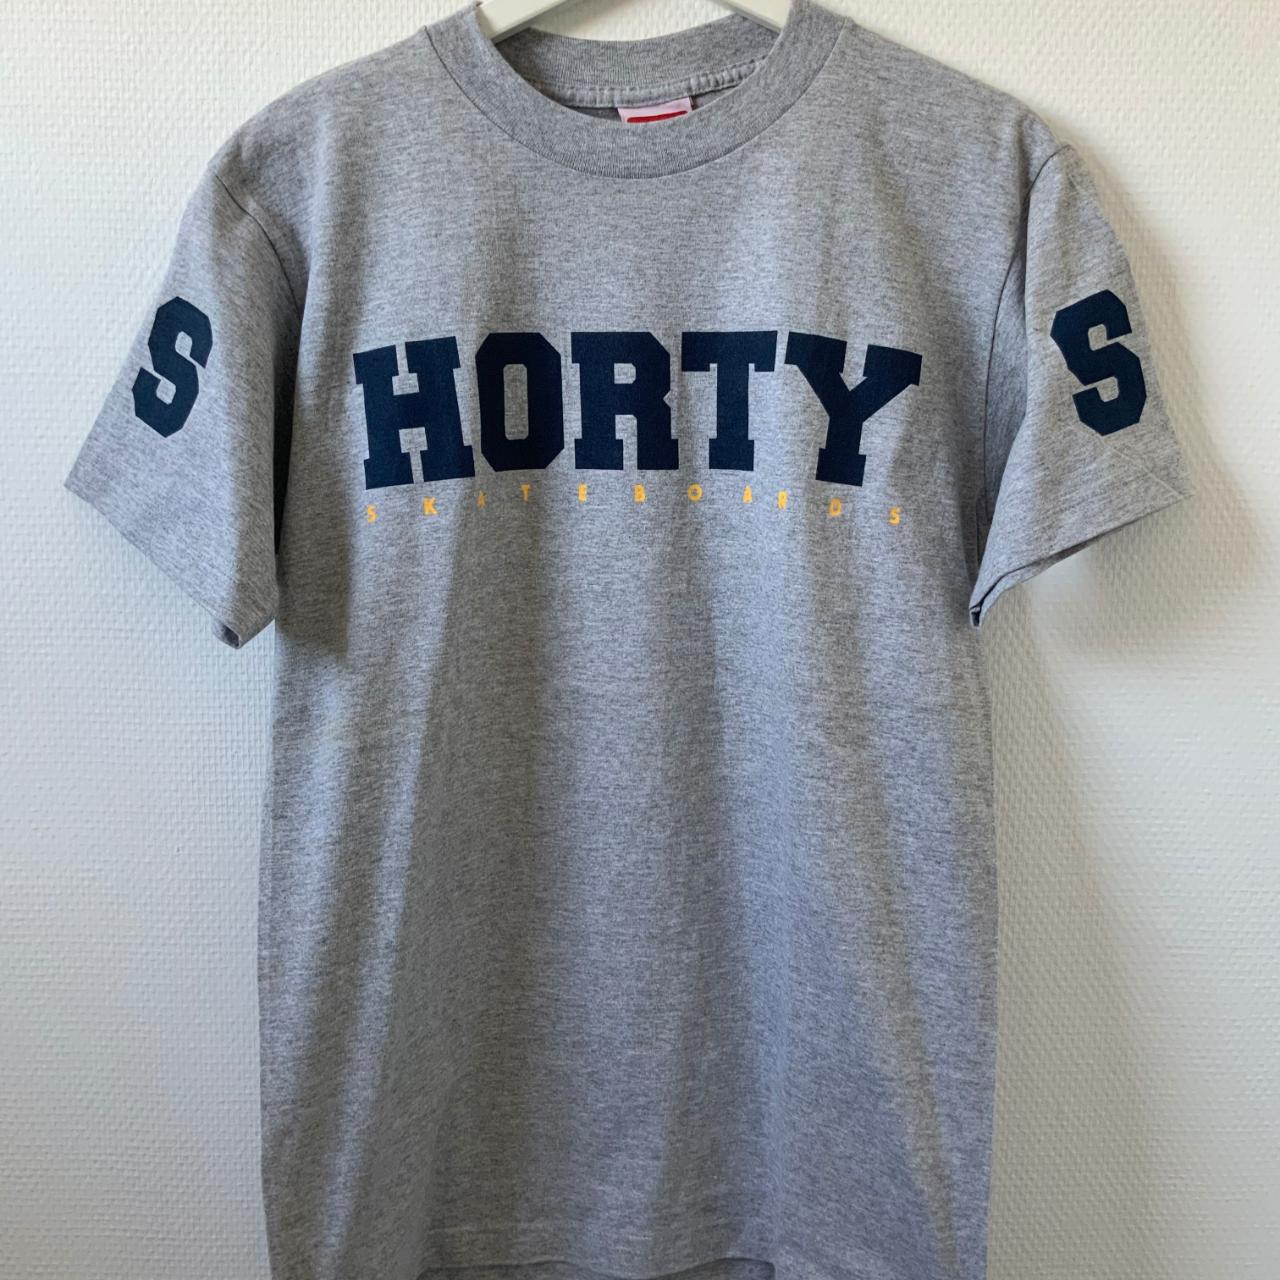 Vintage Shorty's skateboard t-shirt The most iconic - Depop